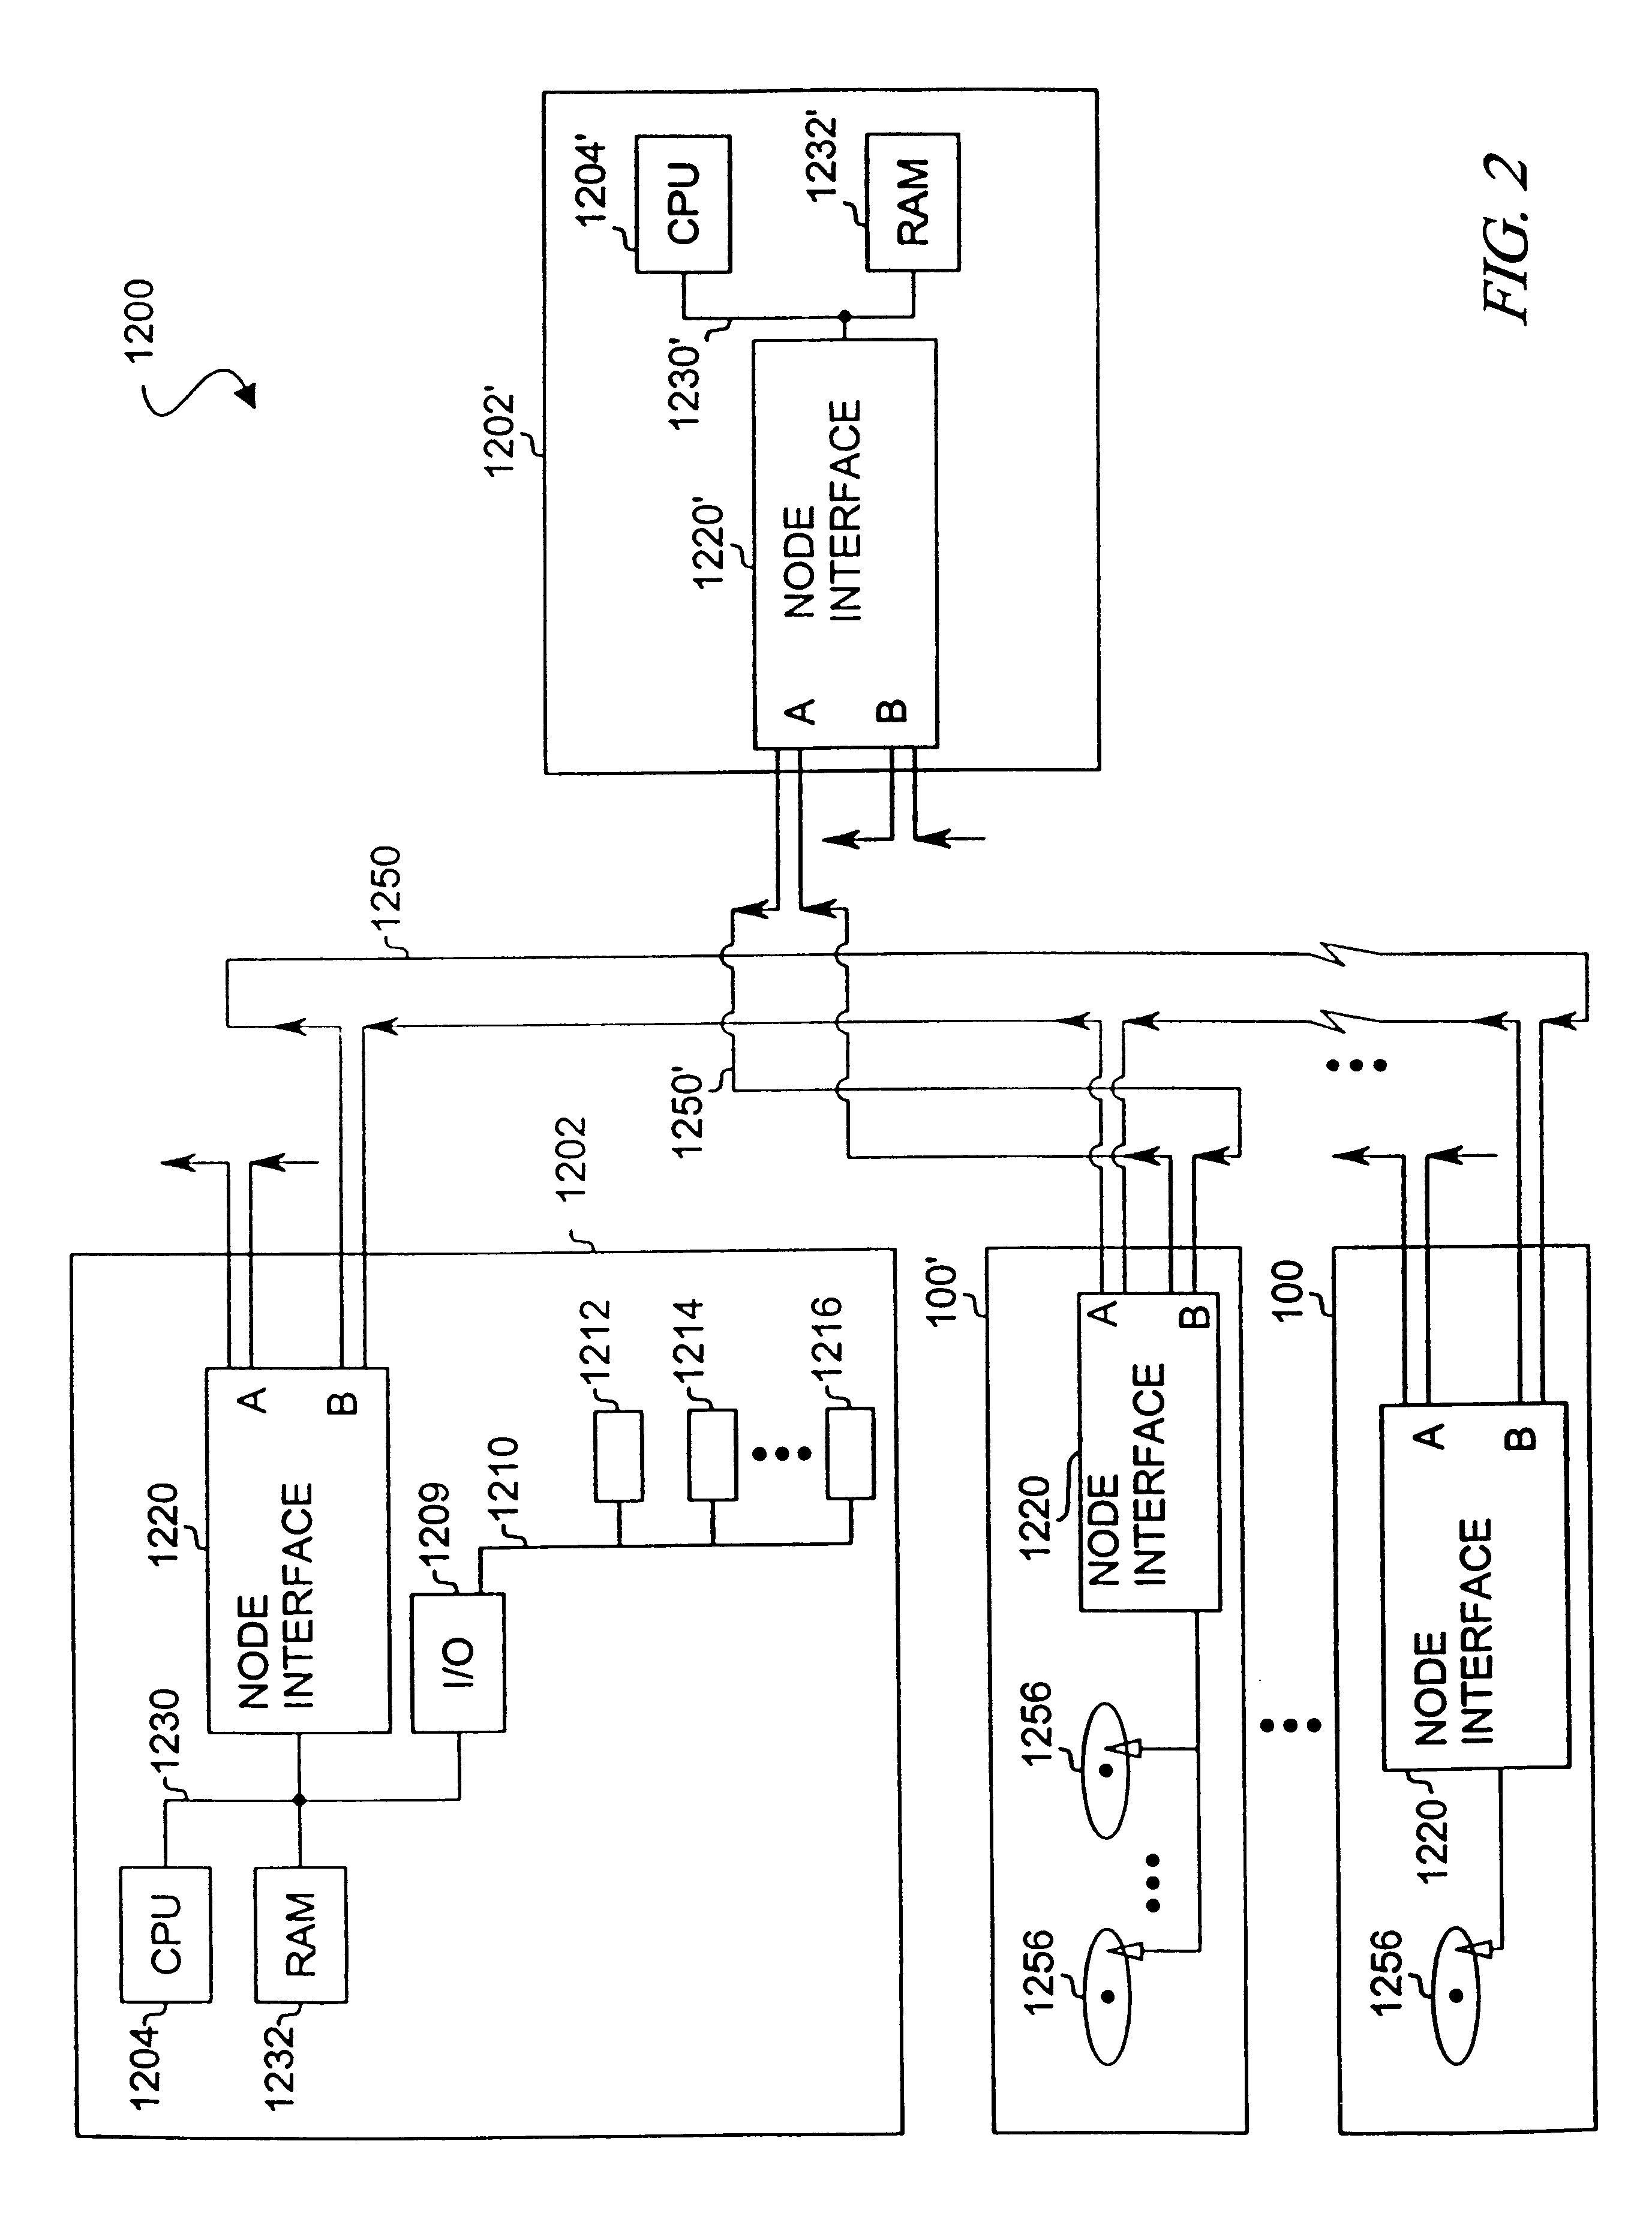 Method and apparatus for preserving loop fairness with dynamic half-duplex